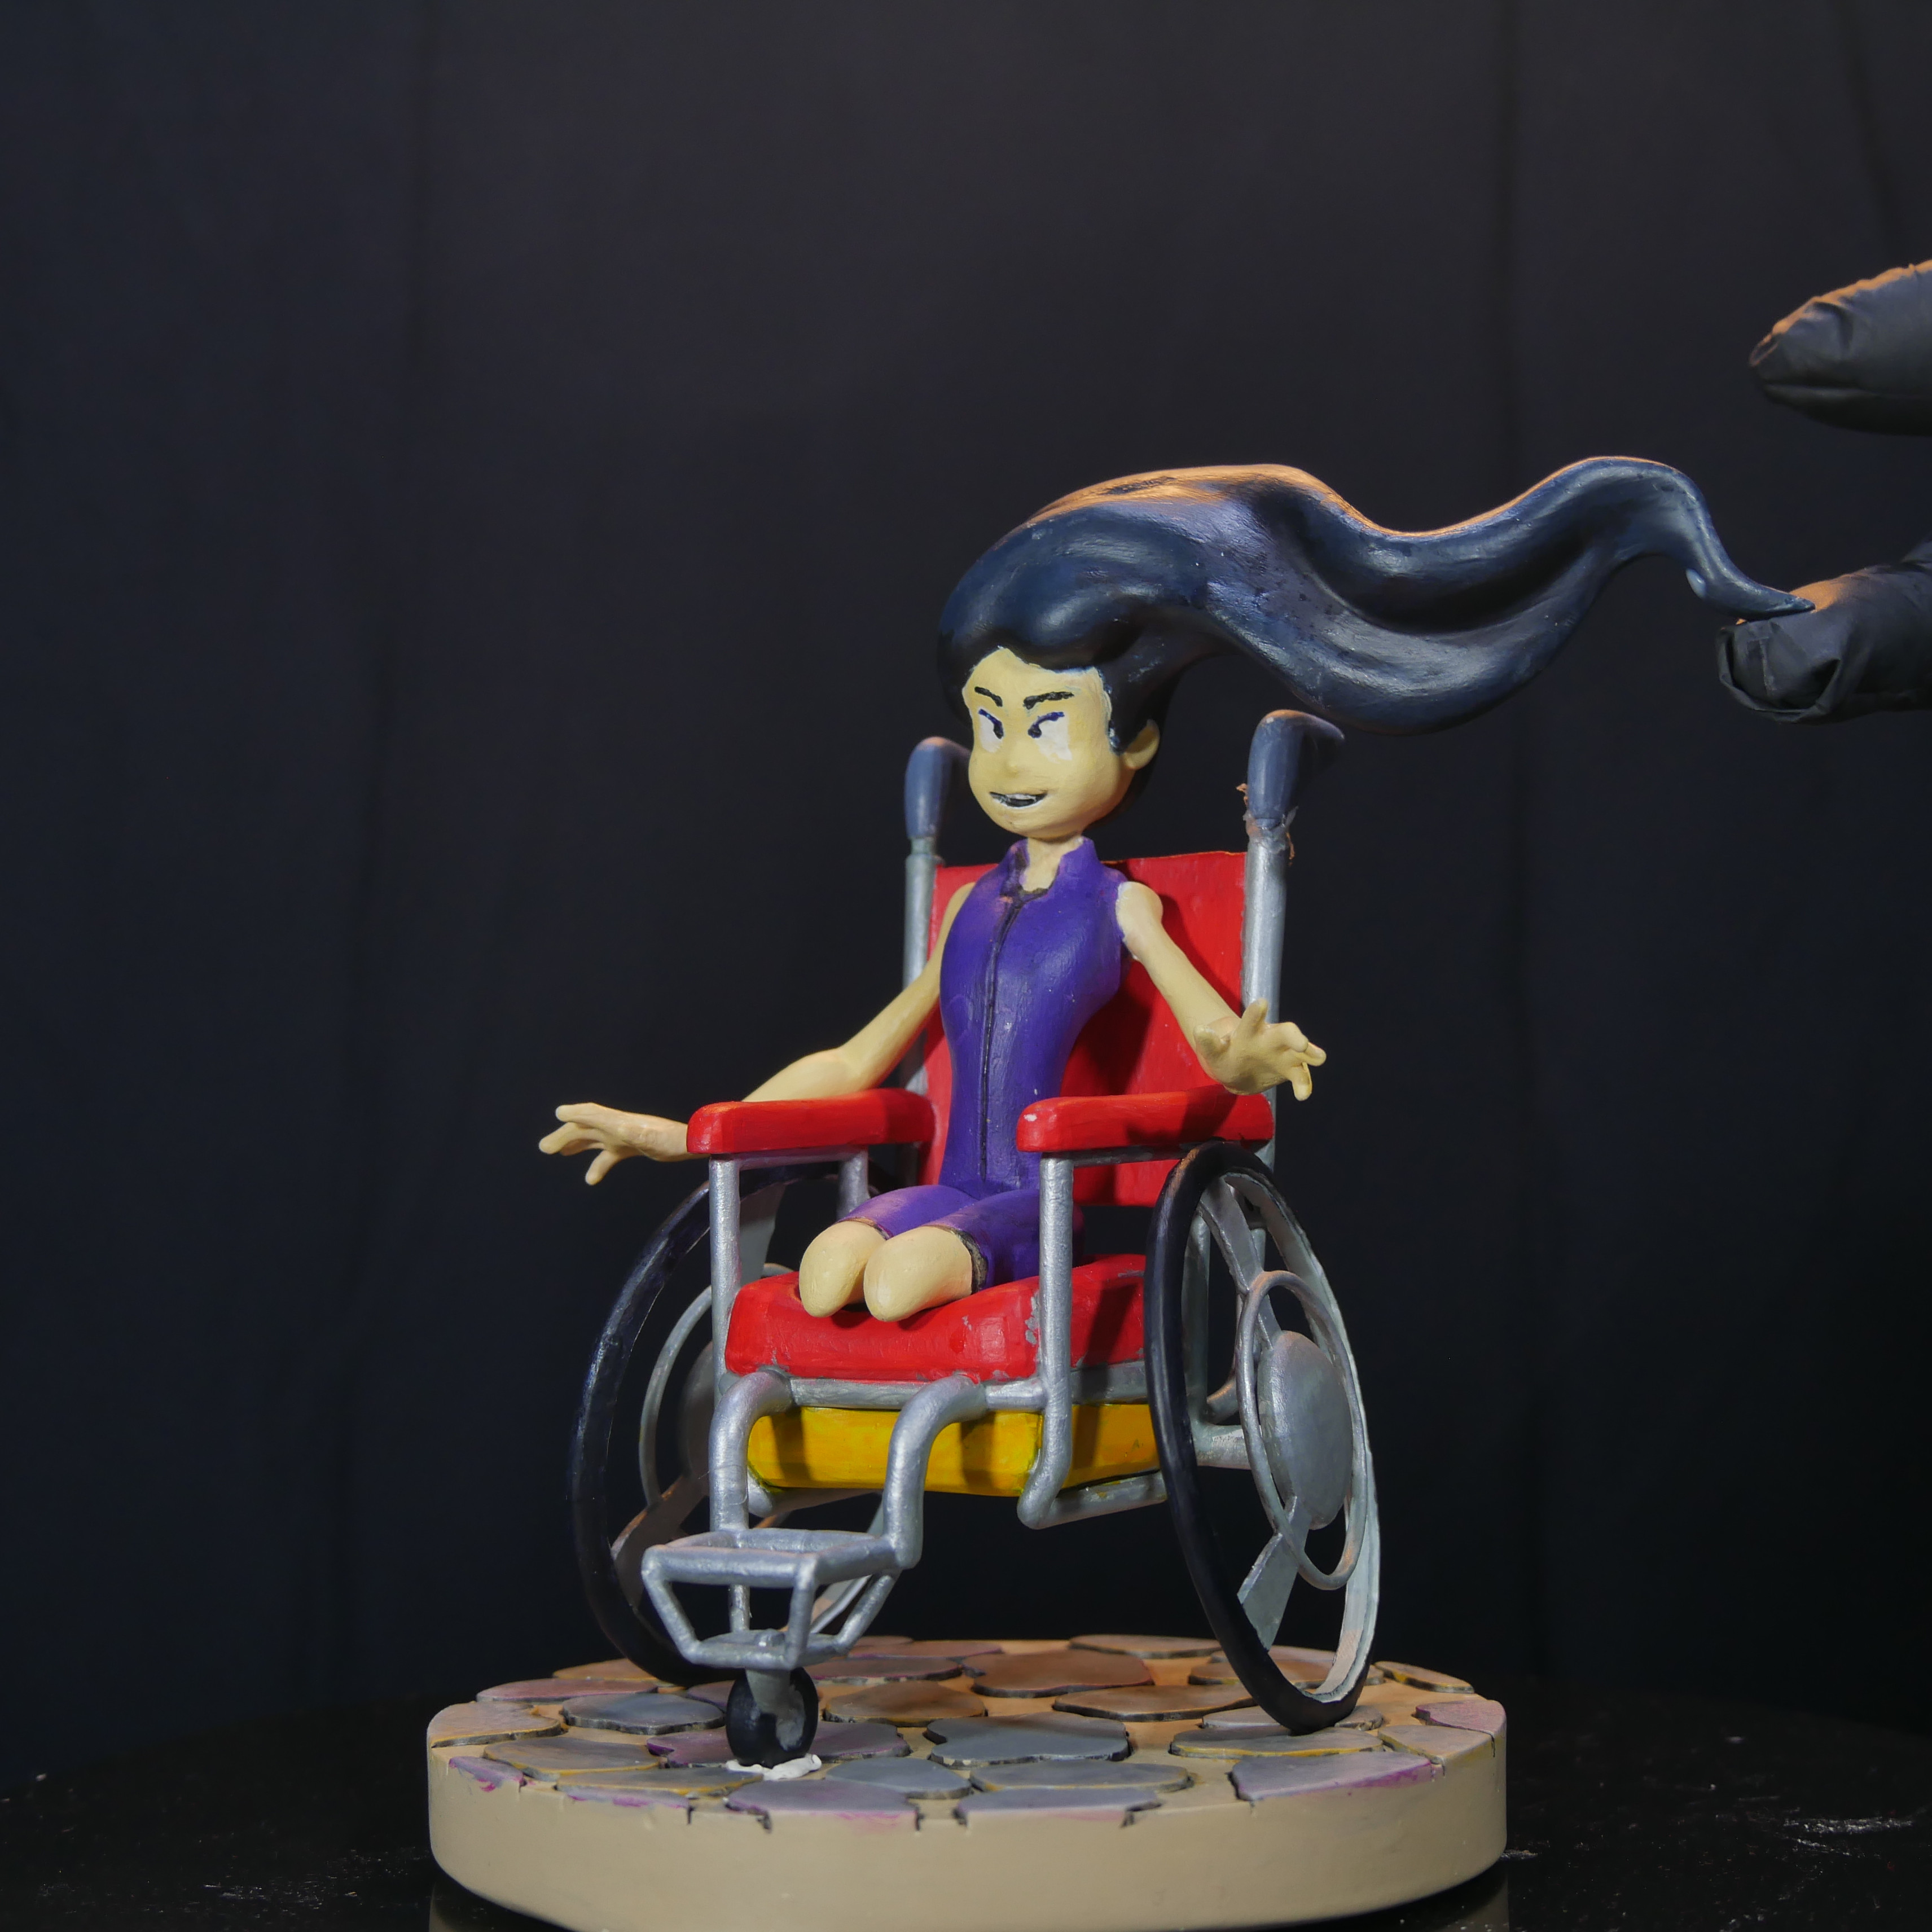 Here is the same model with the wheelchair